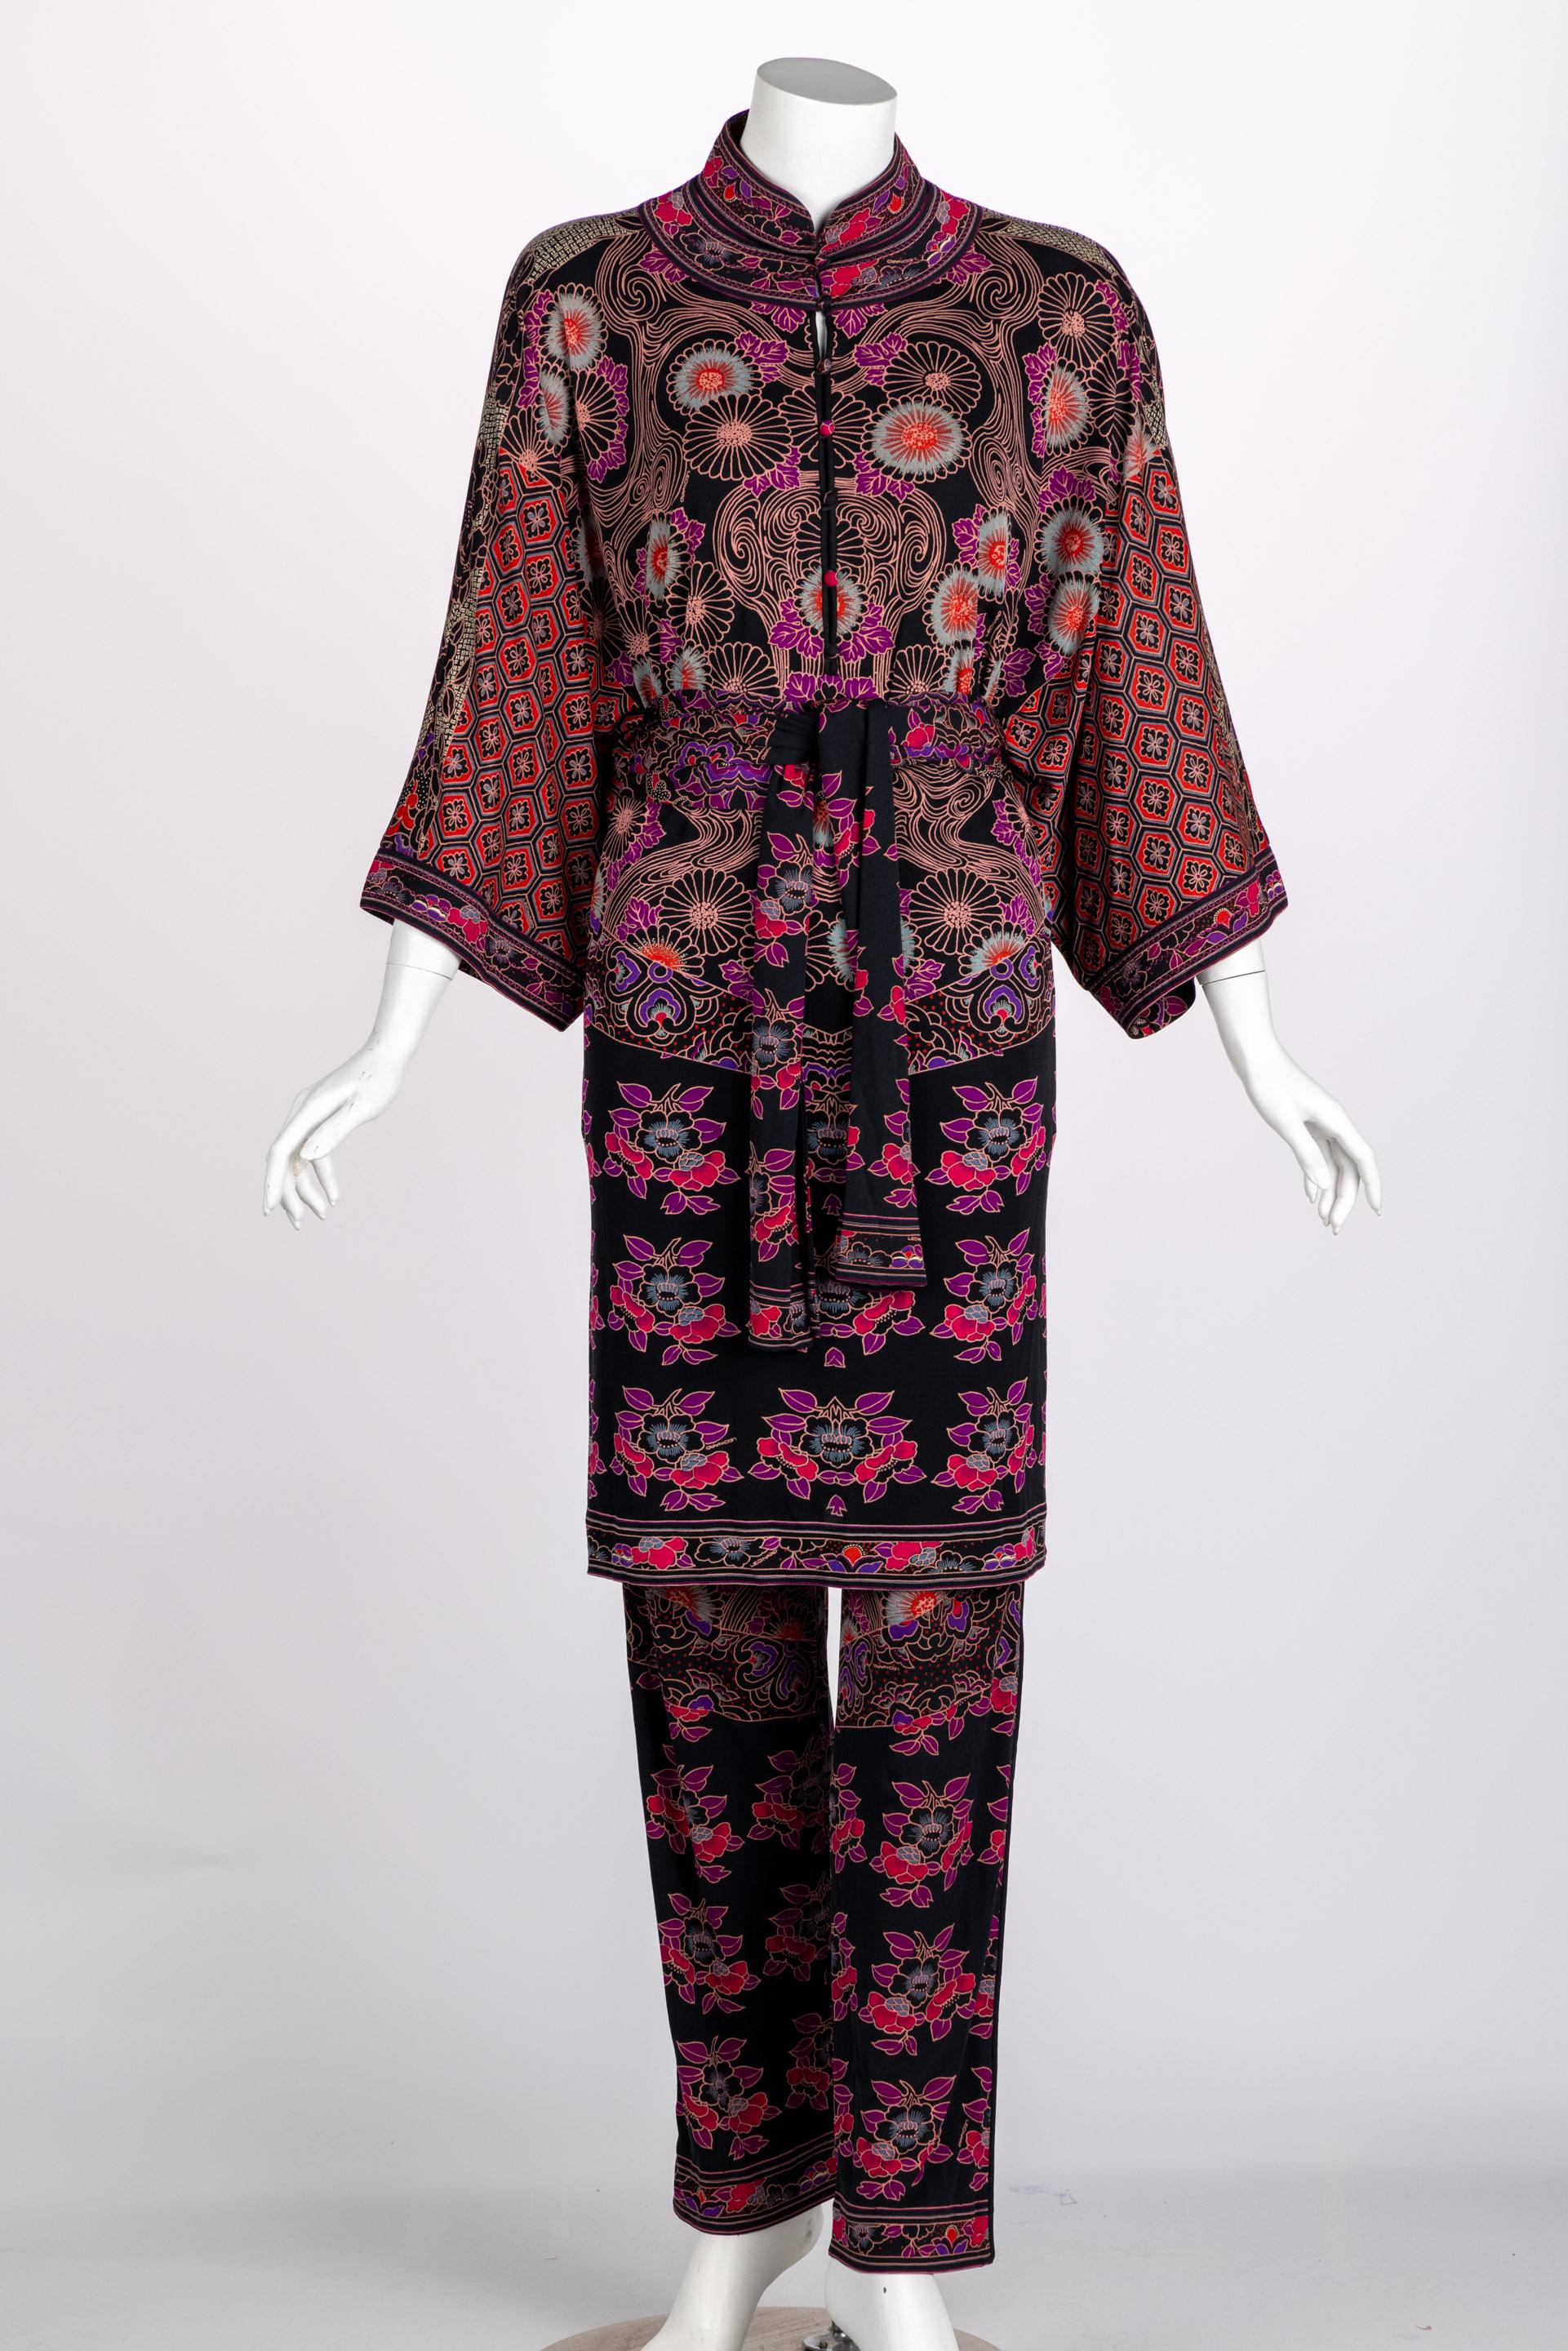 Synonymous with luxury and innovation, Leonard Paris is collected for its unique prints, like the one found on this dazzling three-piece set from the 1970’s. The kaleidoscopic print has an oriental feel, incorporating flowers such as camellias and